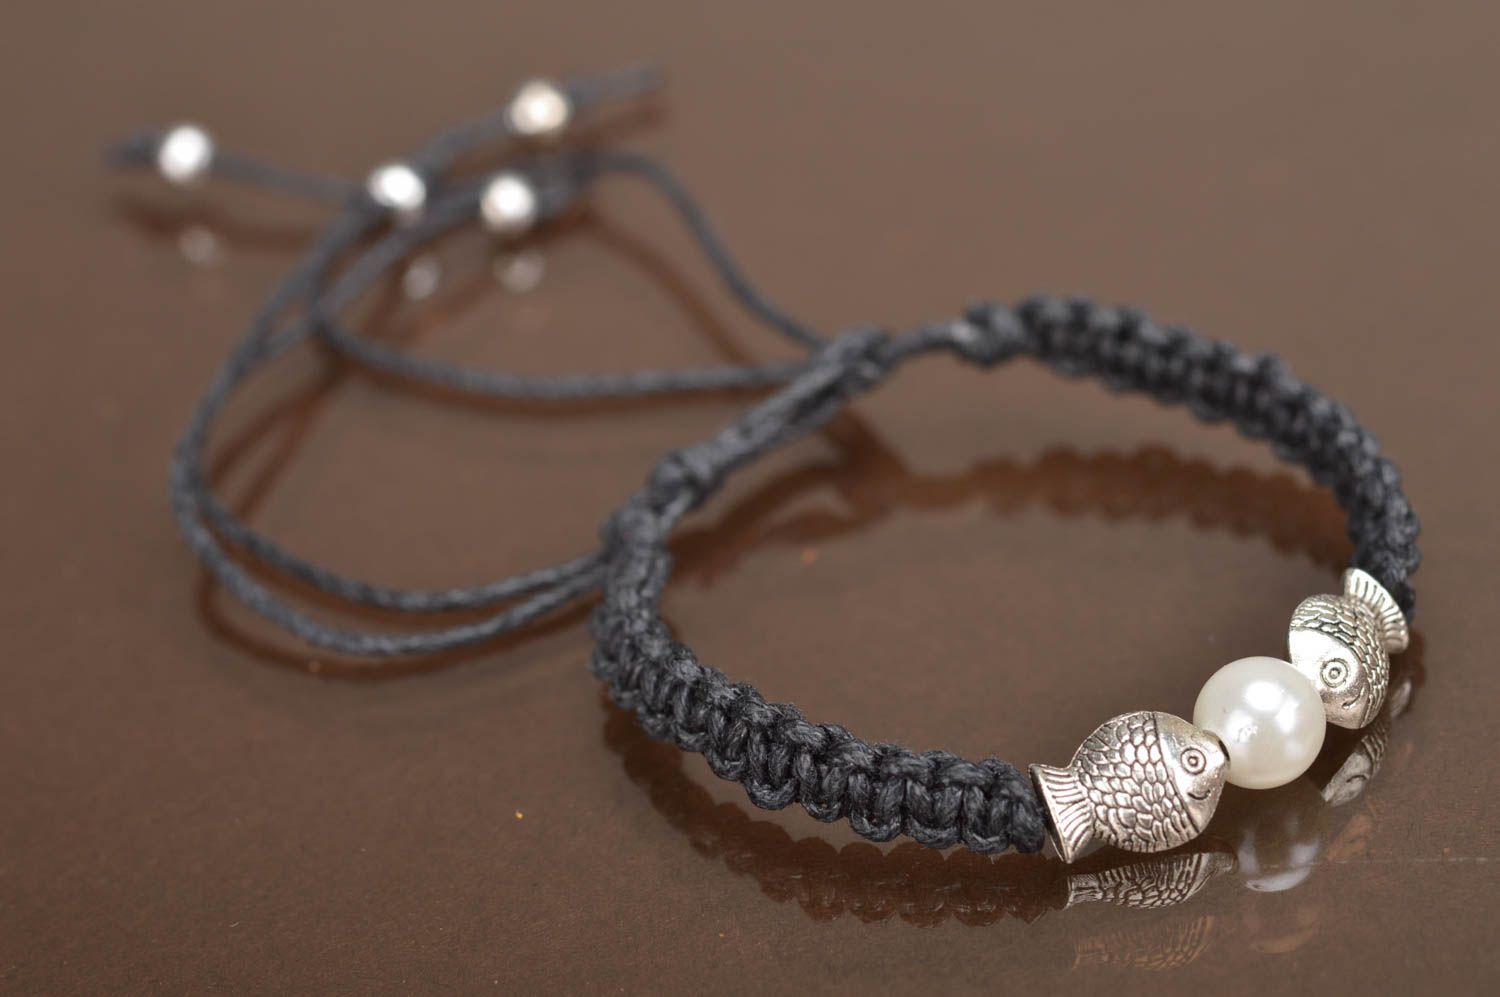 Thin black woven wrist bracelet made of lace with white bead and fittings photo 2